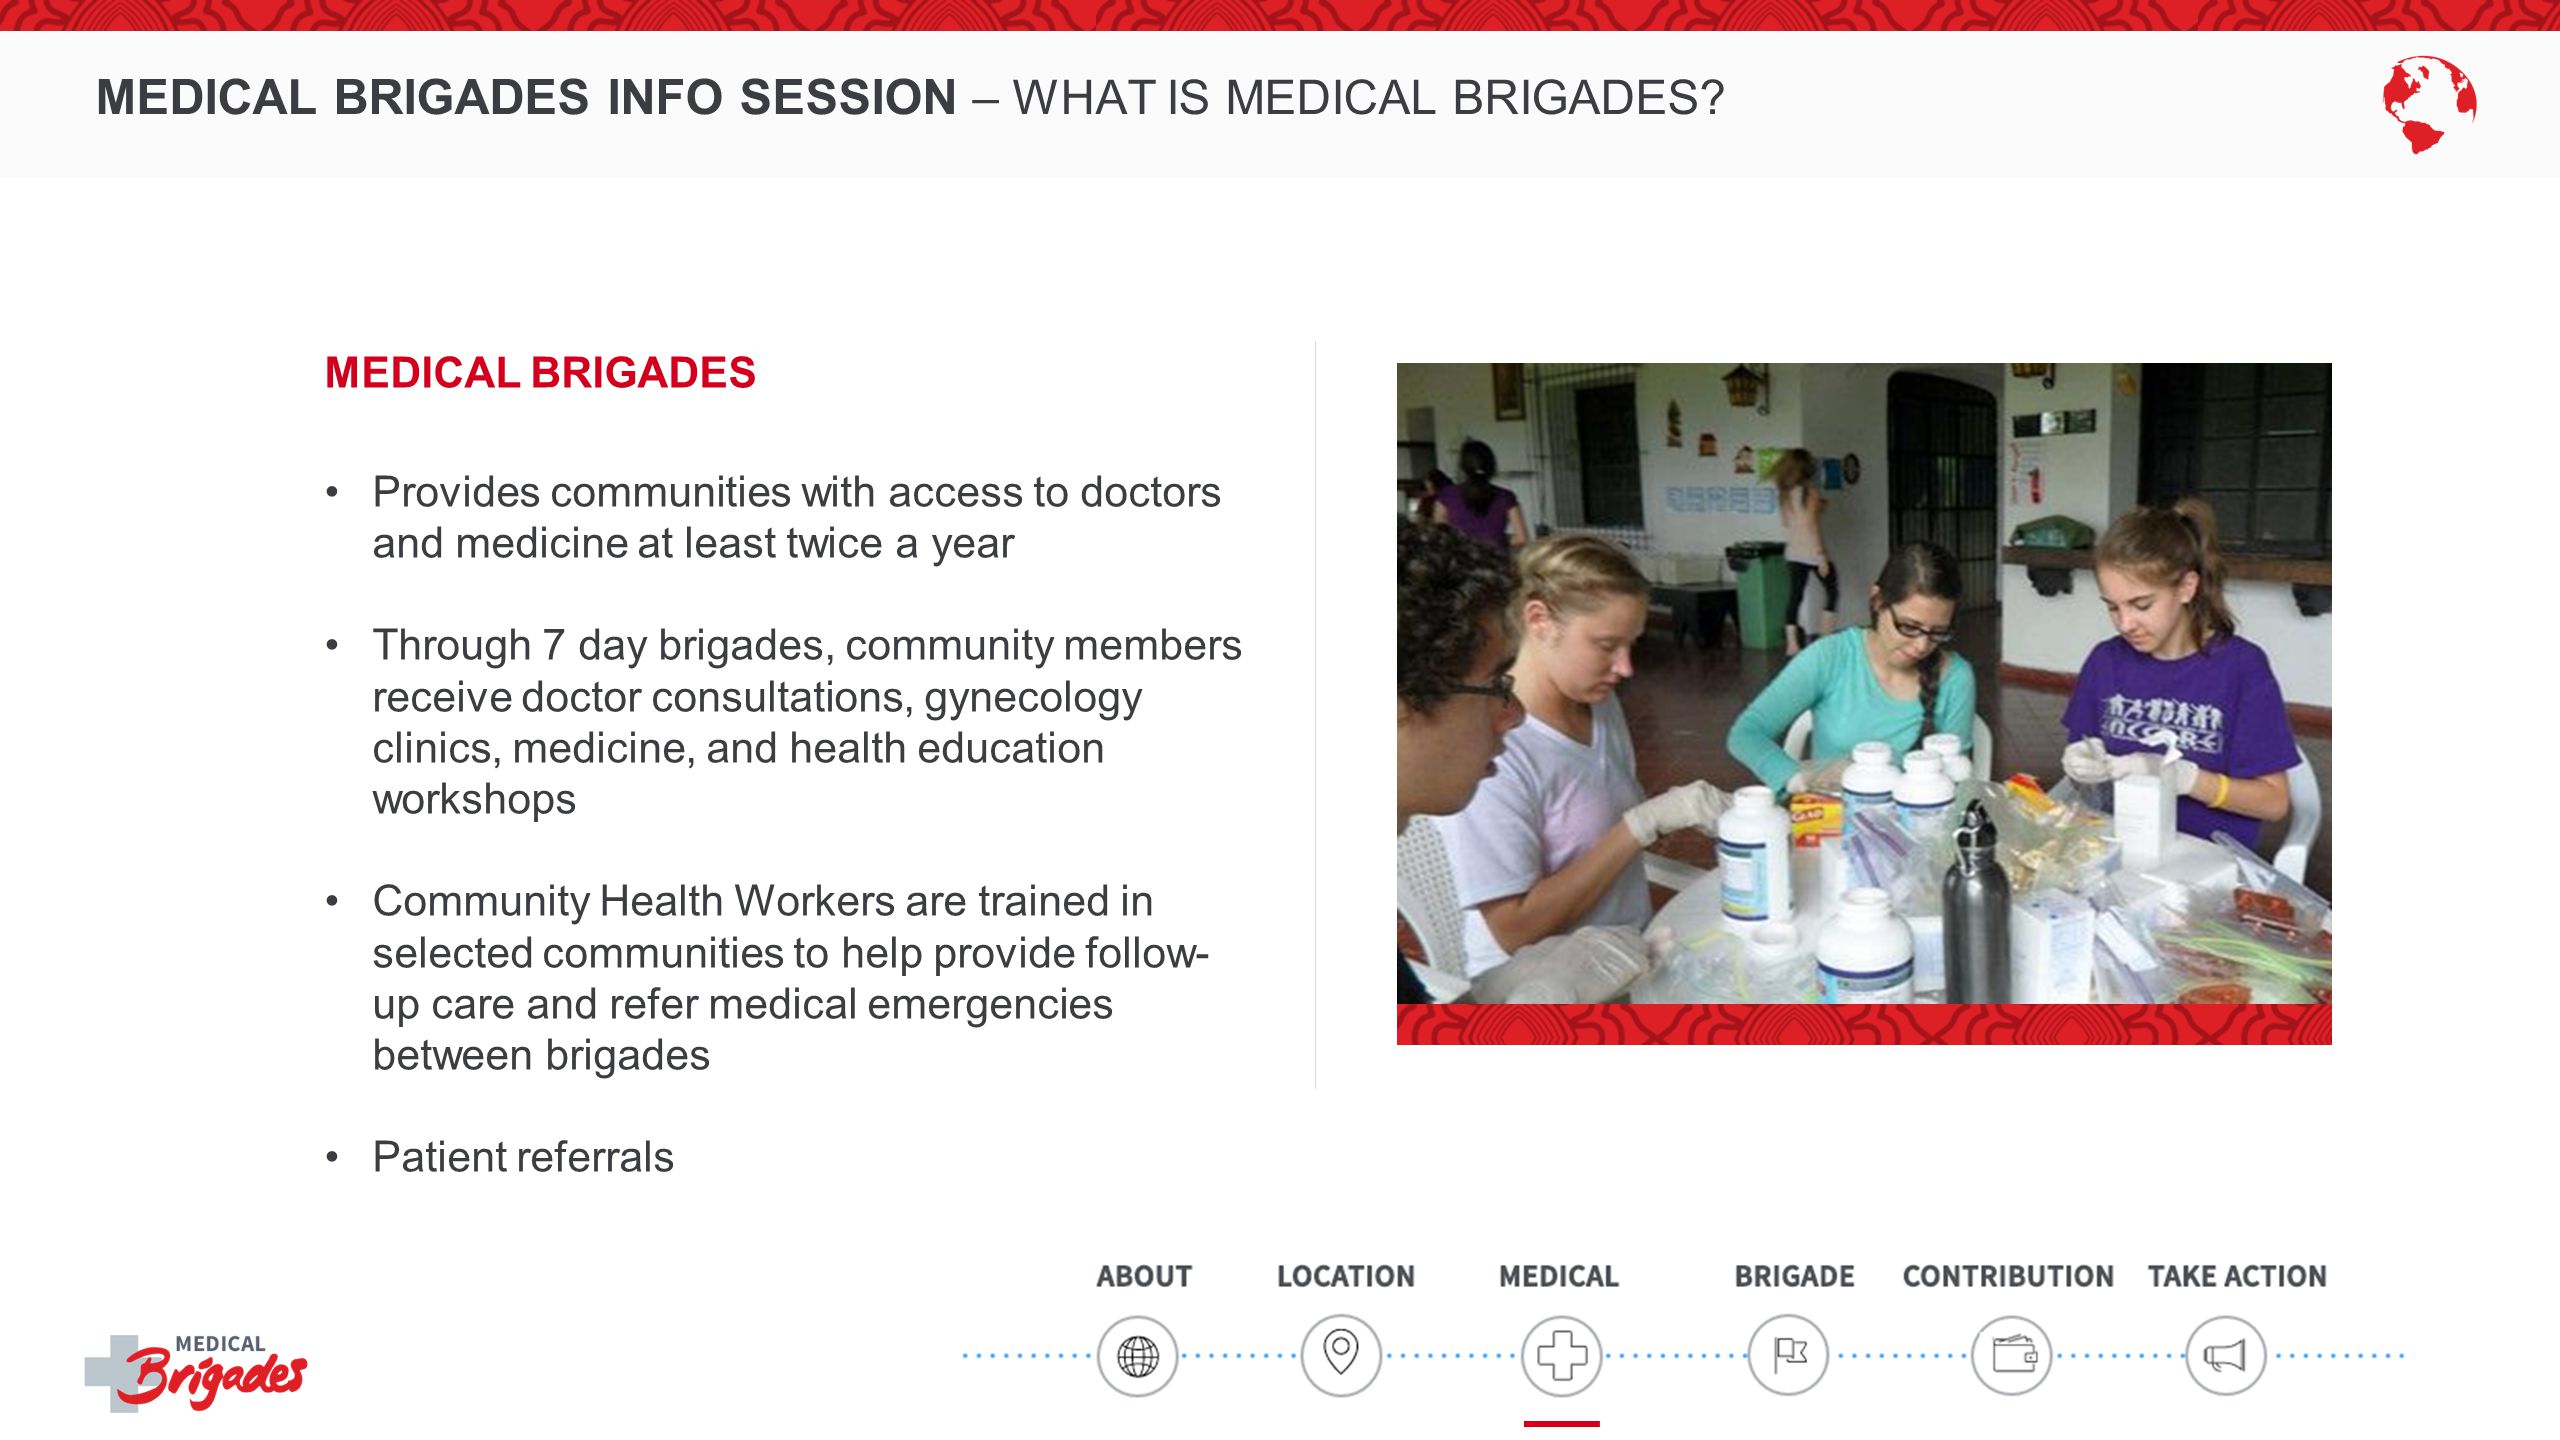 MEDICAL BRIGADES INFO SESSION – WHAT IS MEDICAL BRIGADES.